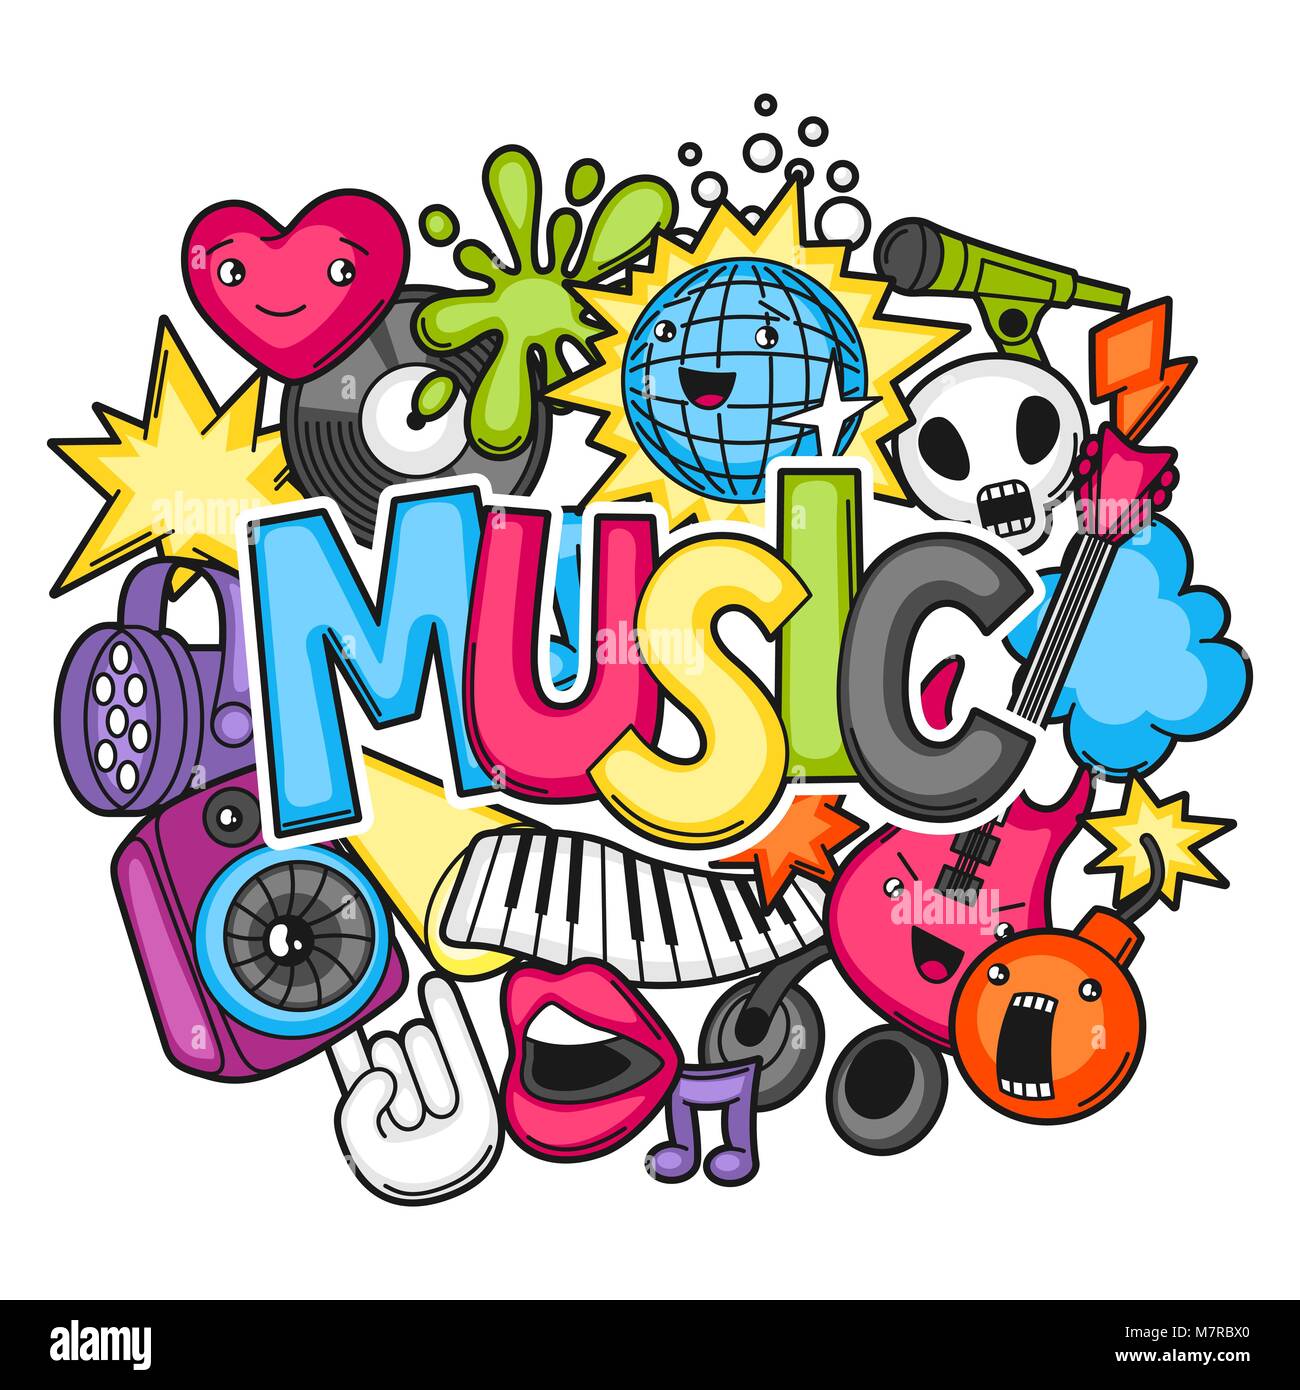 Music party kawaii design. Musical instruments, symbols and objects in cartoon style Stock Vector